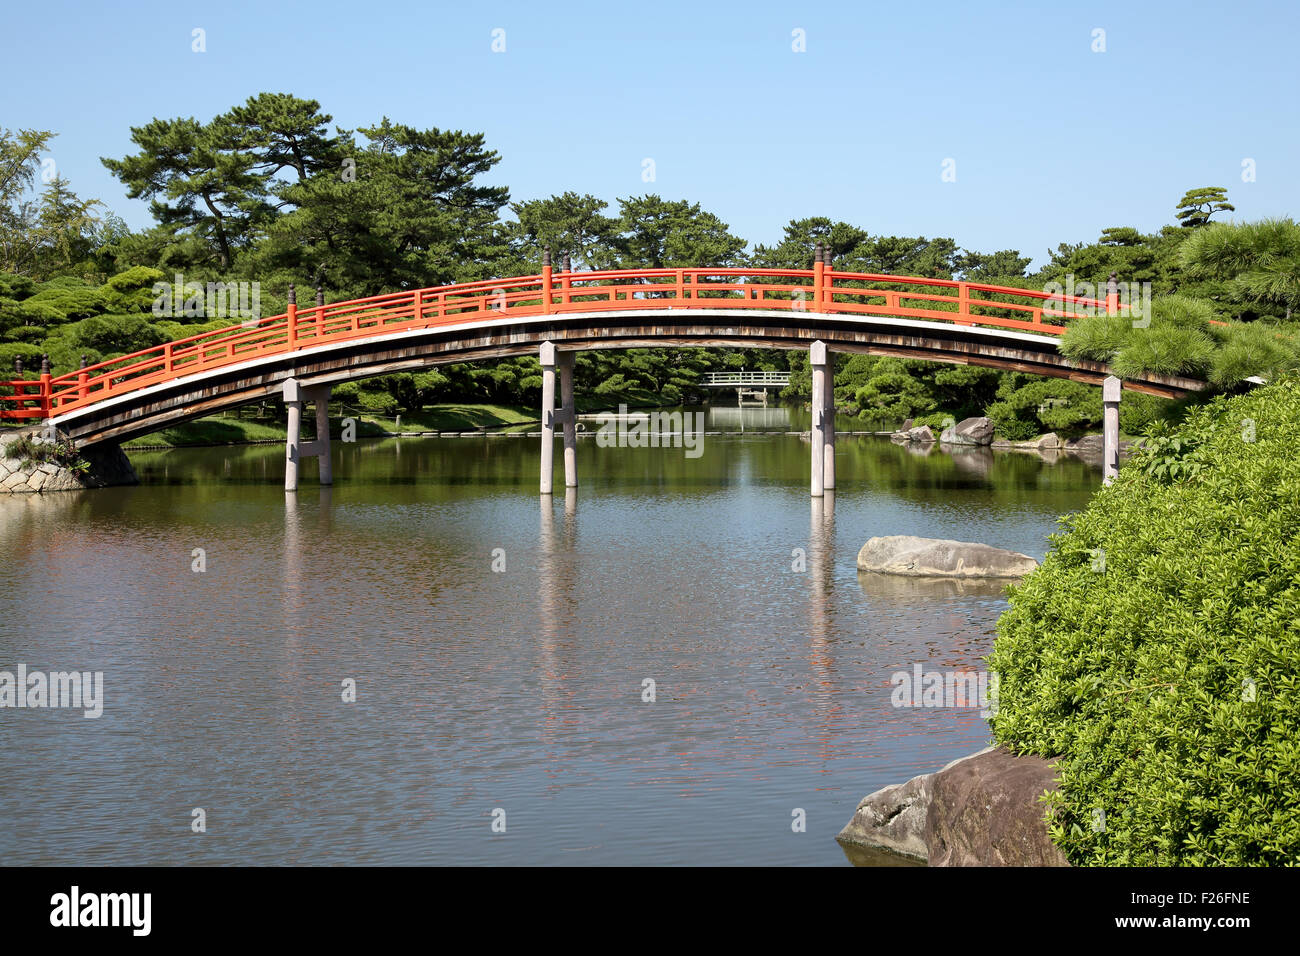 View of Japanese garden with red wooden bridge Stock Photo